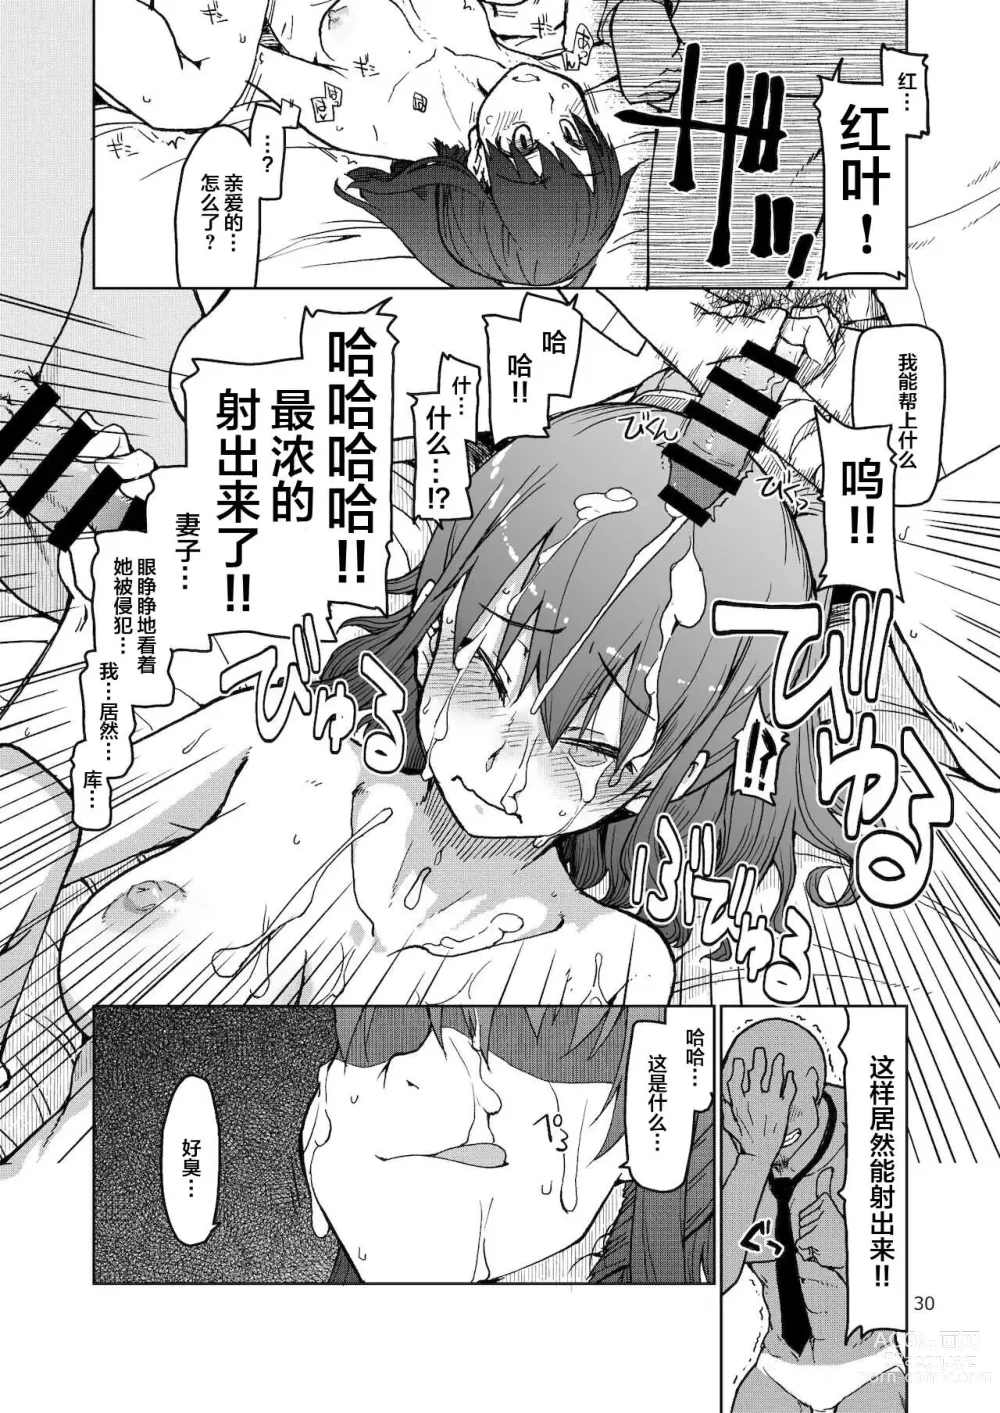 Page 31 of doujinshi SYG -Sell your girlfriend-2